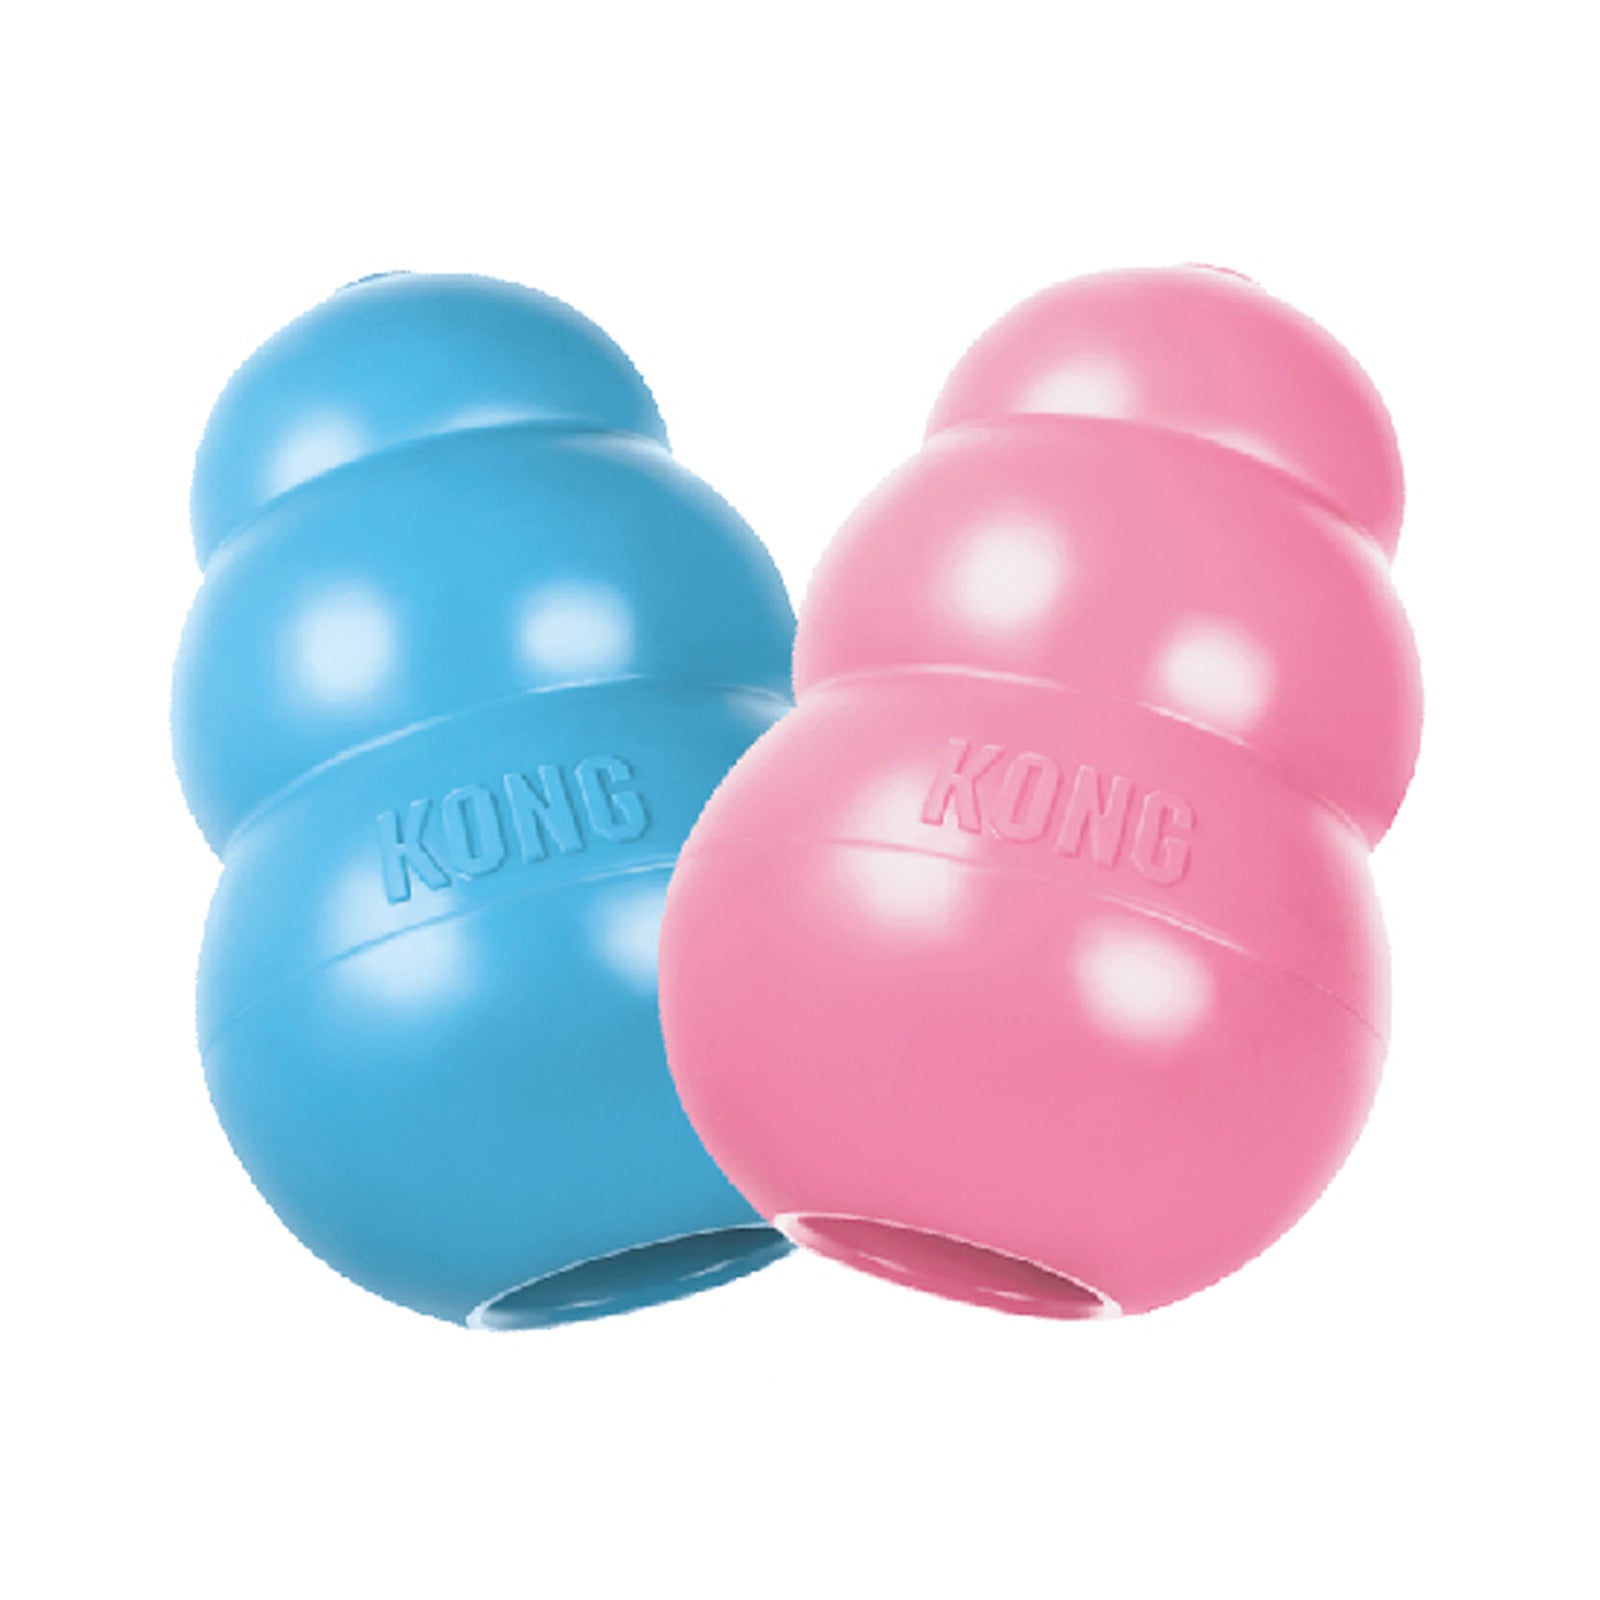 KONG Puppy Dog Toy Small | Pet Food Leaders